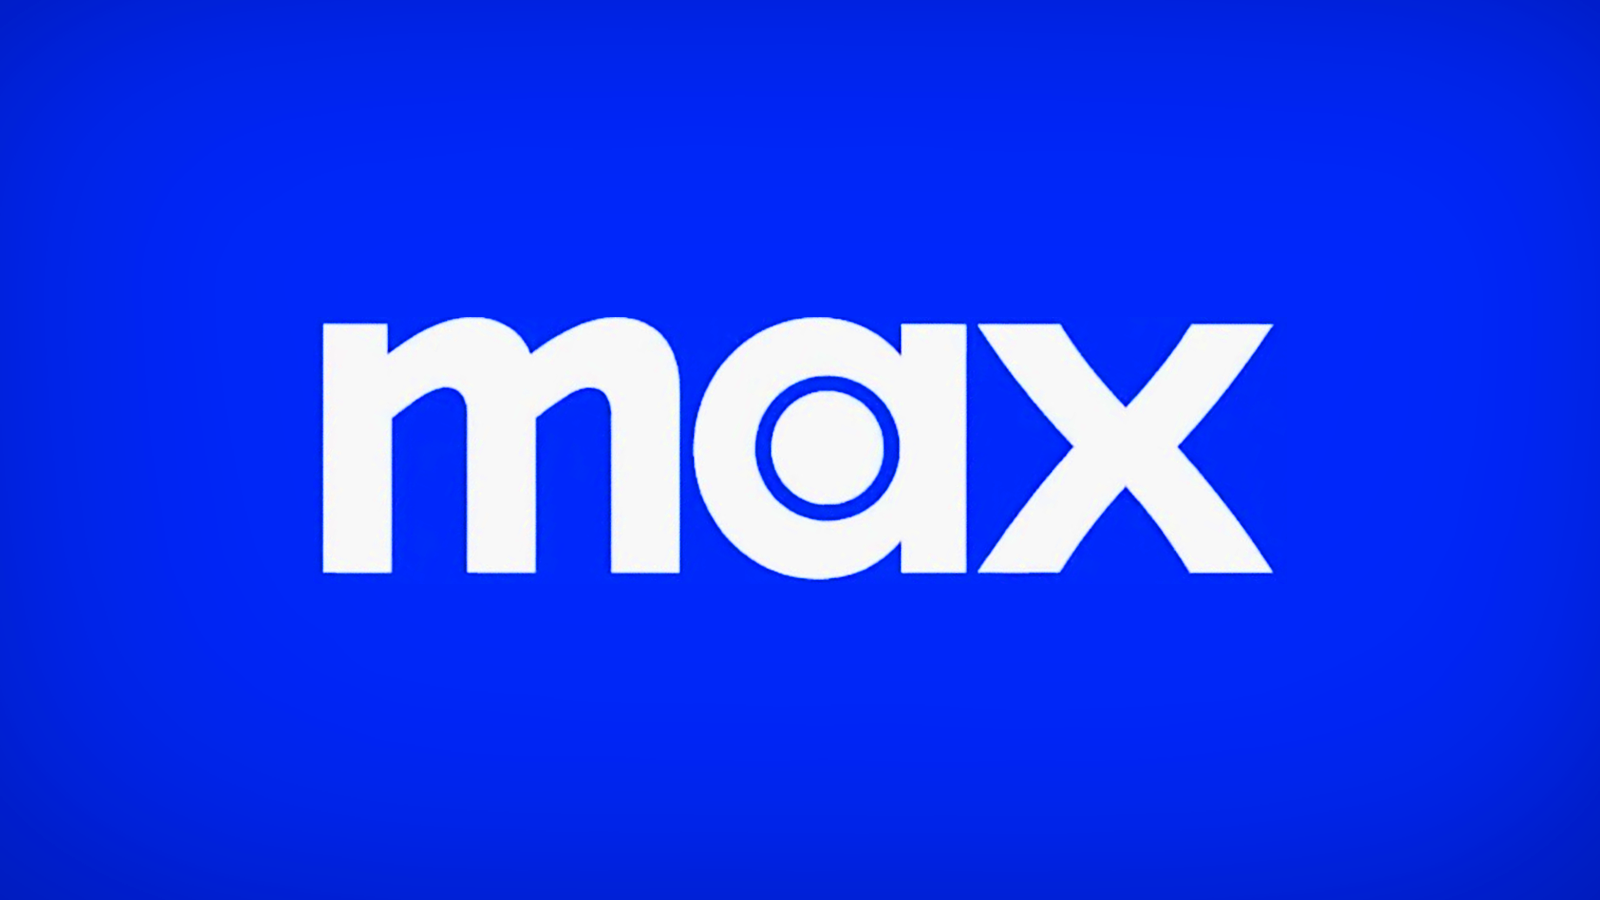 20230424084033amMax Streaming Service Gets a Distinctive Brand Identity from DixonBaxi-Chris Ellinas-00.png